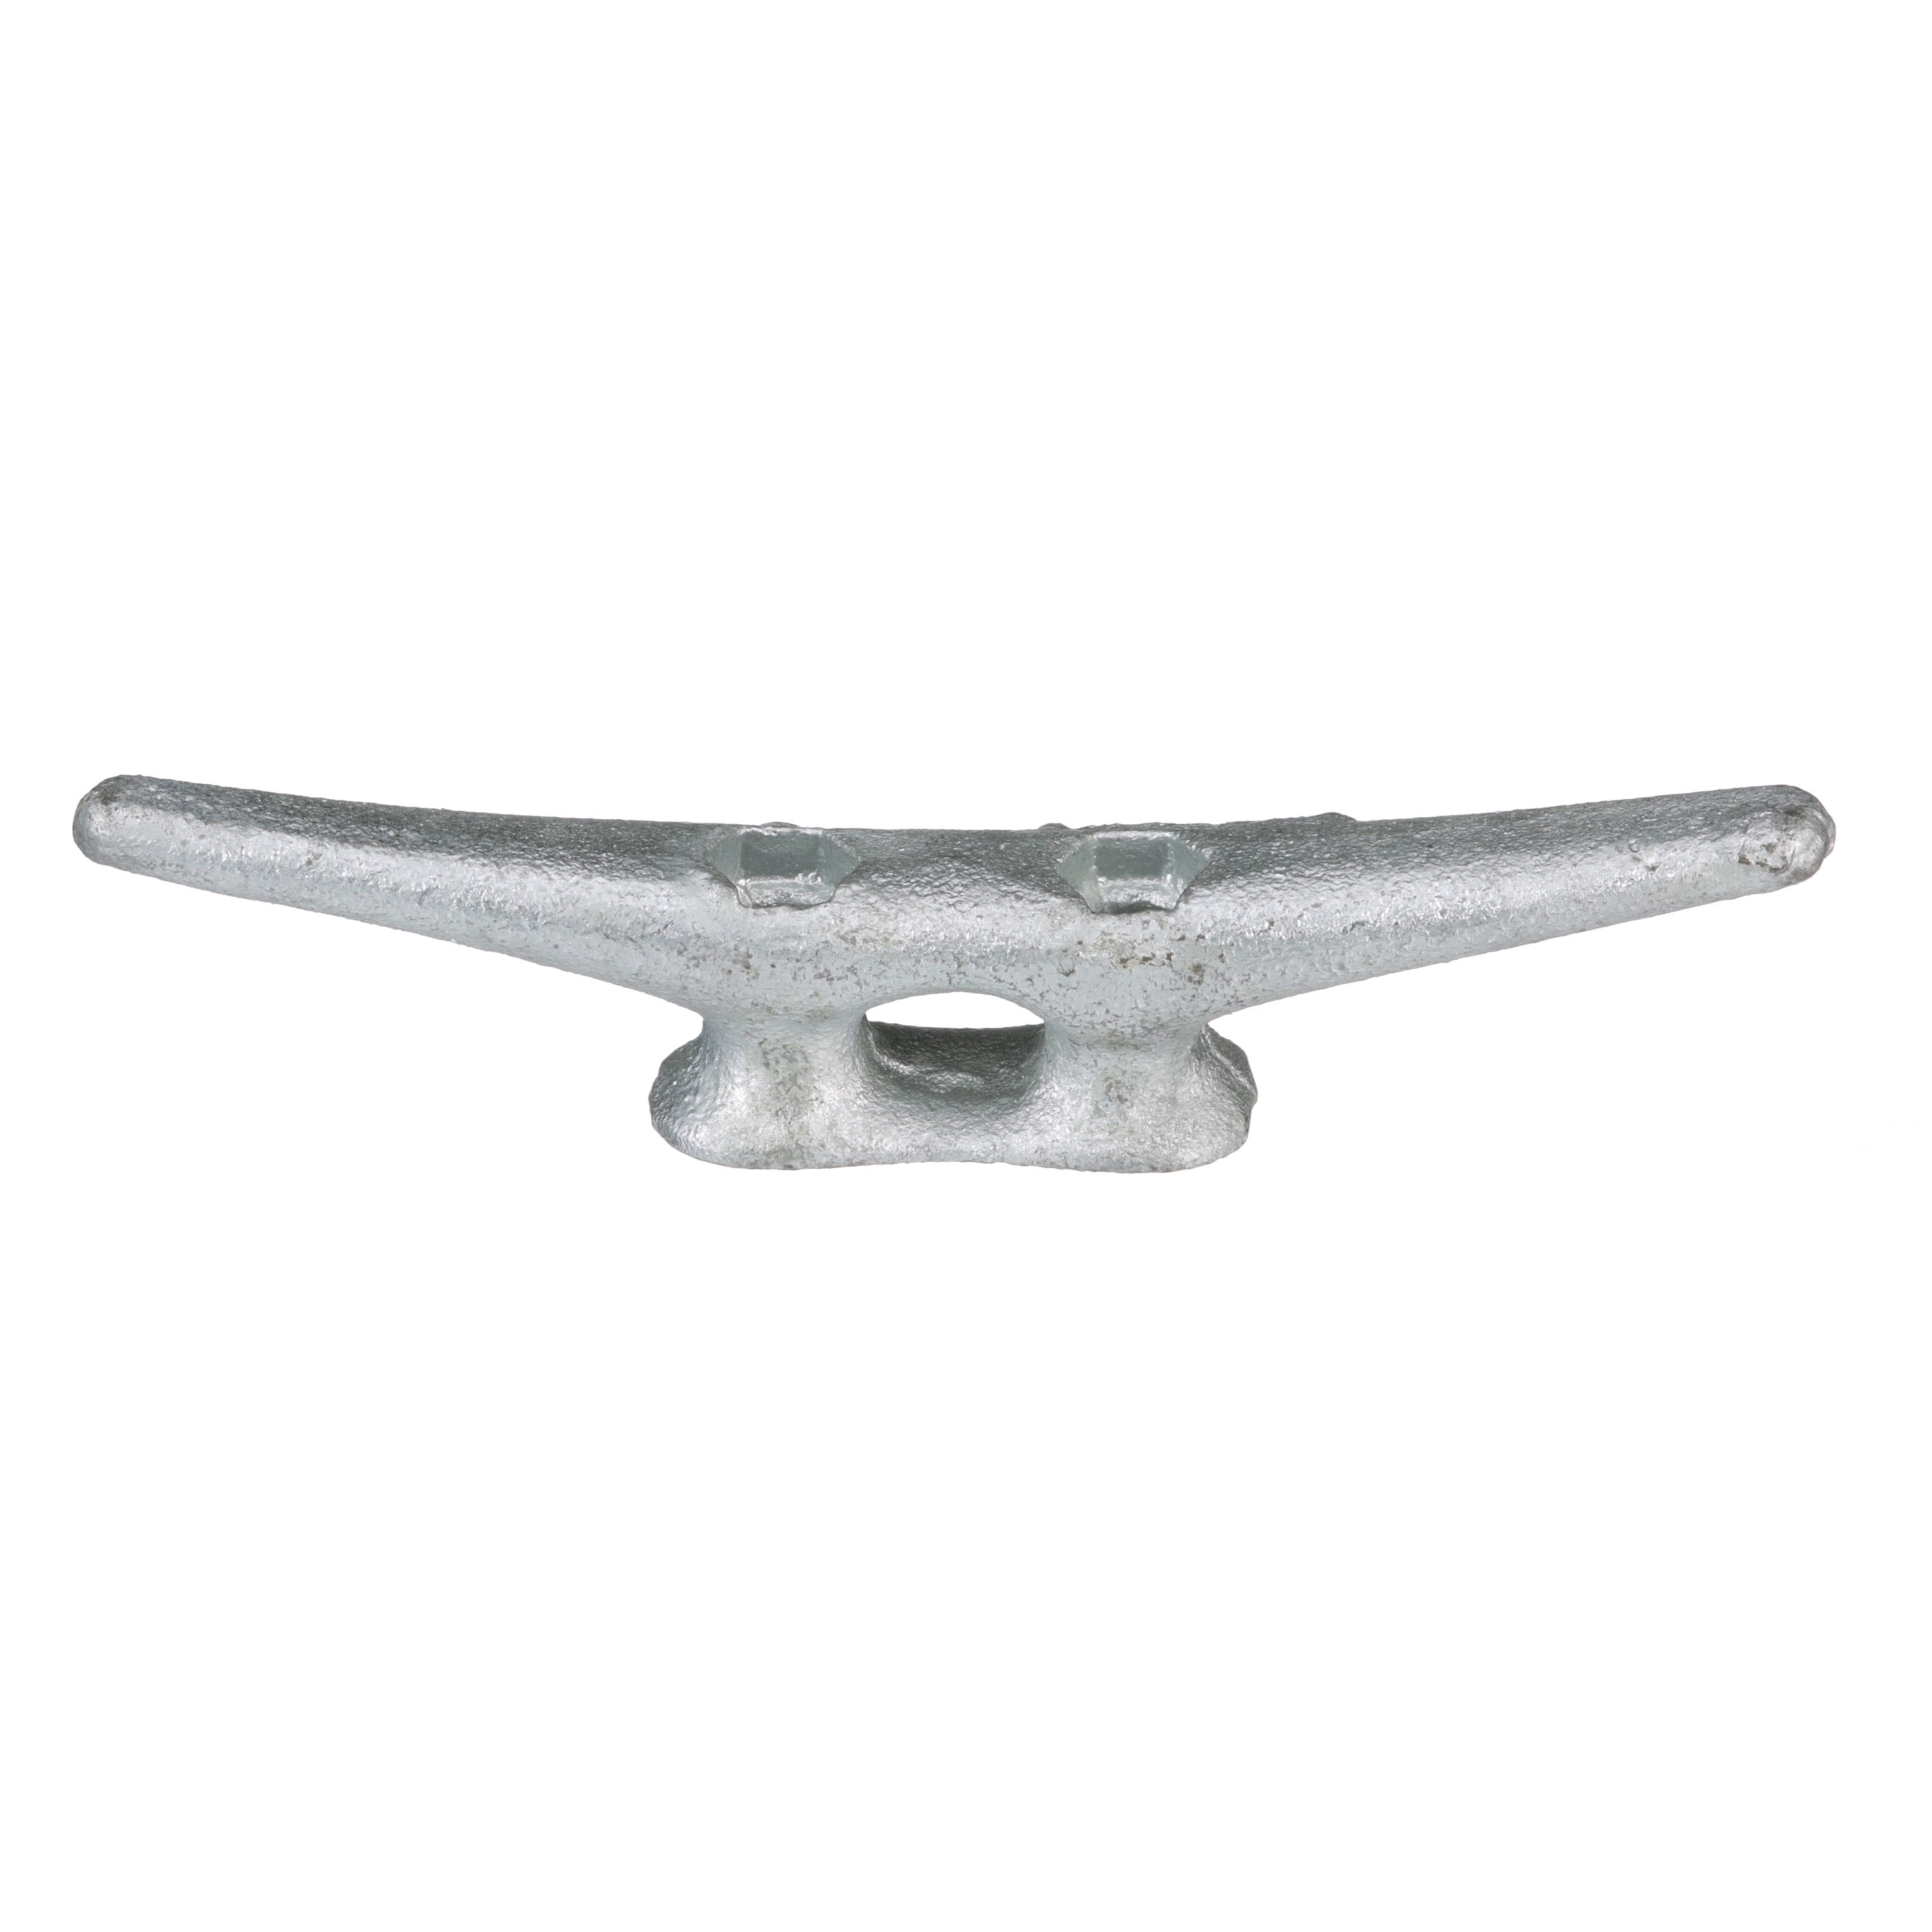 Details about   Sea Dog 044604-1 Open Base Cleat 4" 4 Pack 